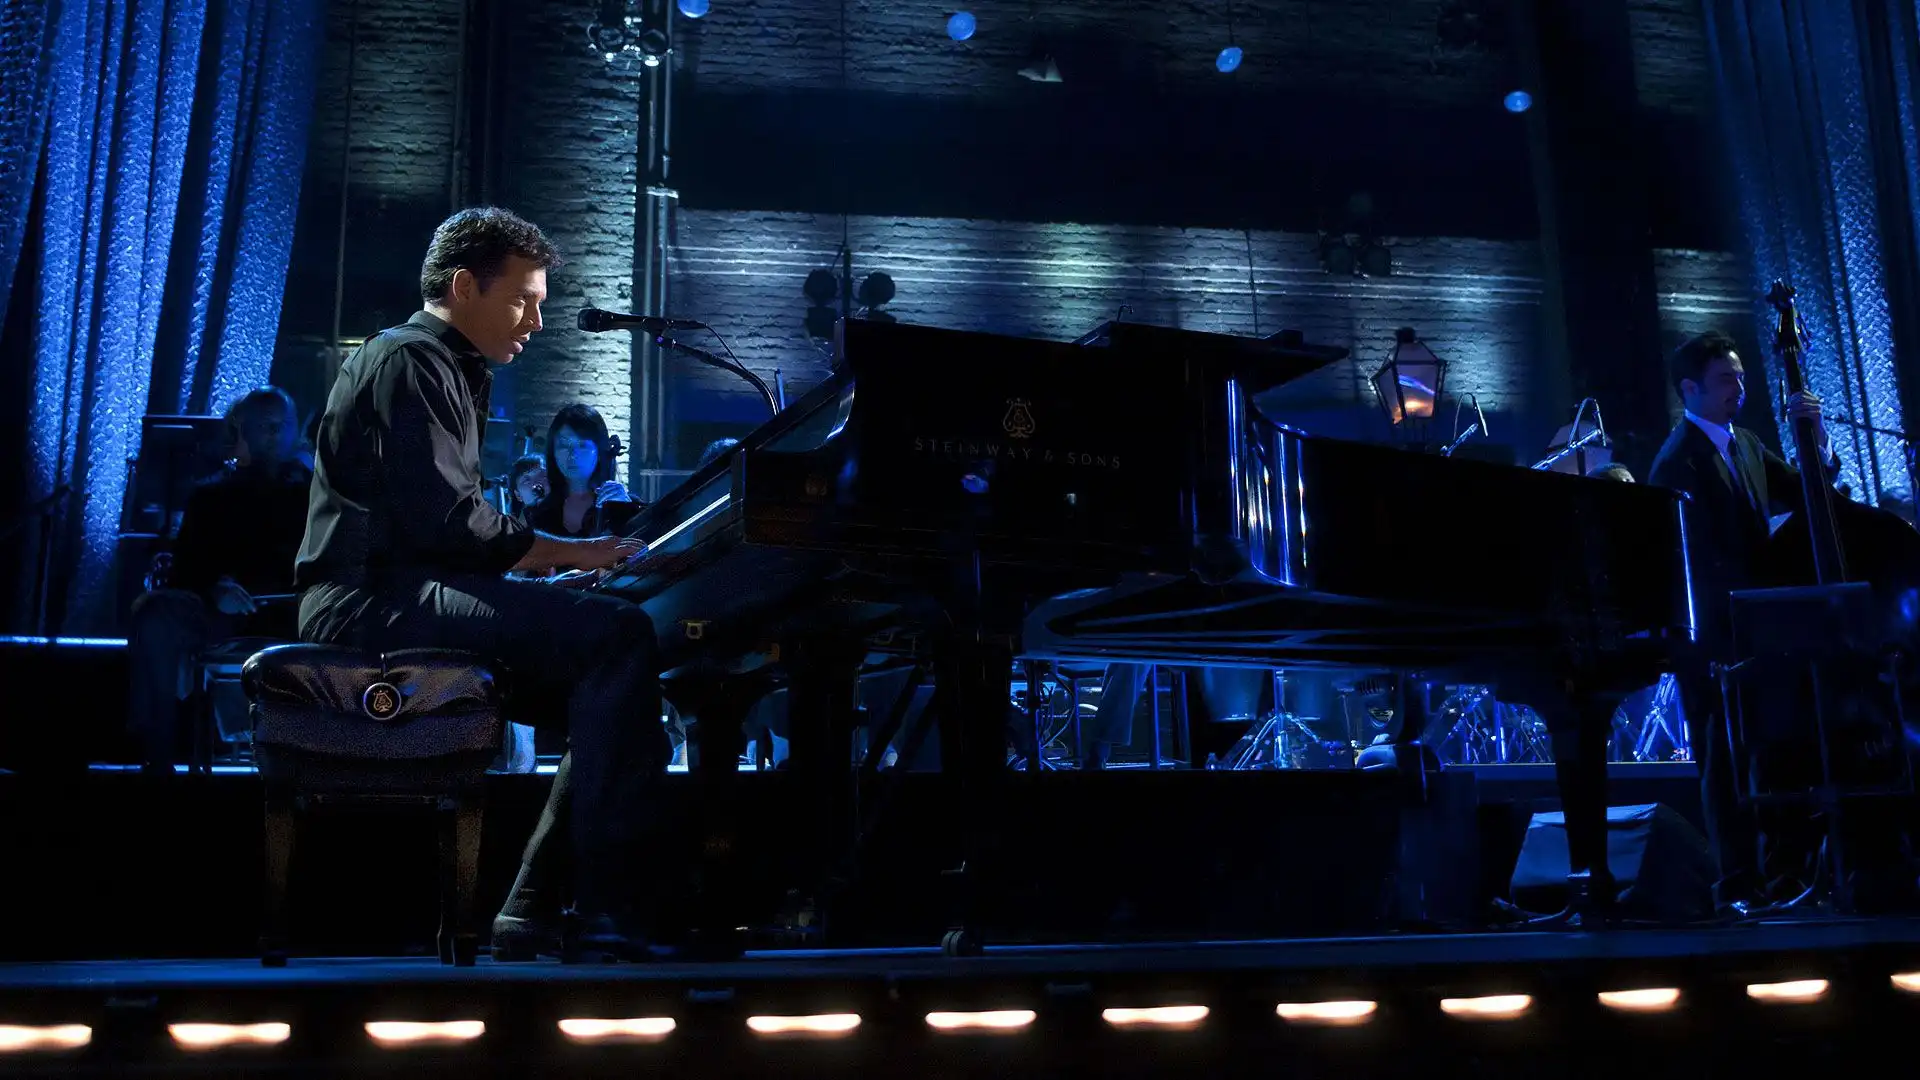 Harry Connick Jr In Concert on Broadway